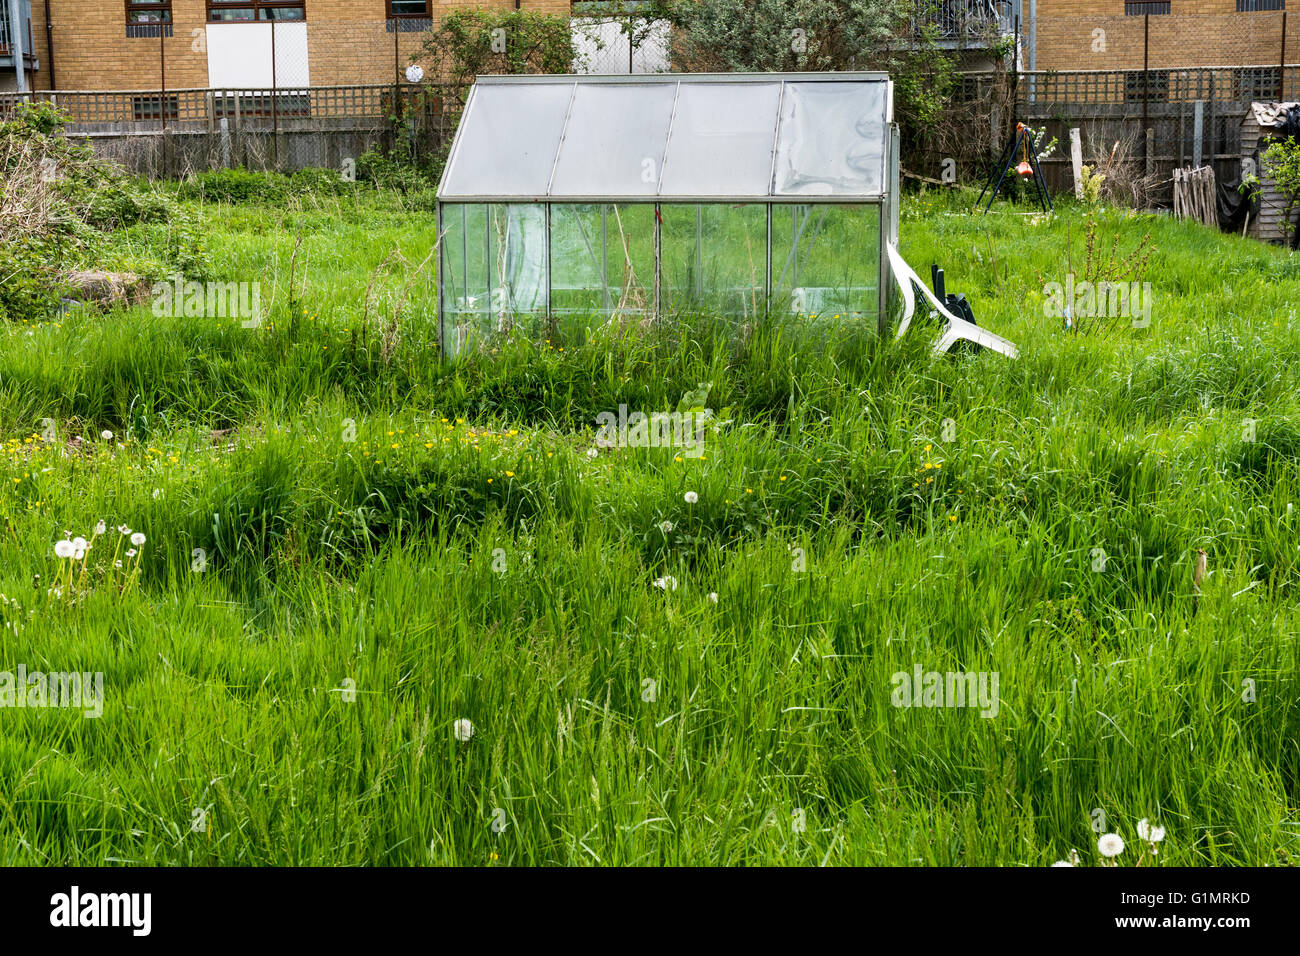 Neglected allotment garden that is overgrown with weeds and an empty greenhouse Stock Photo